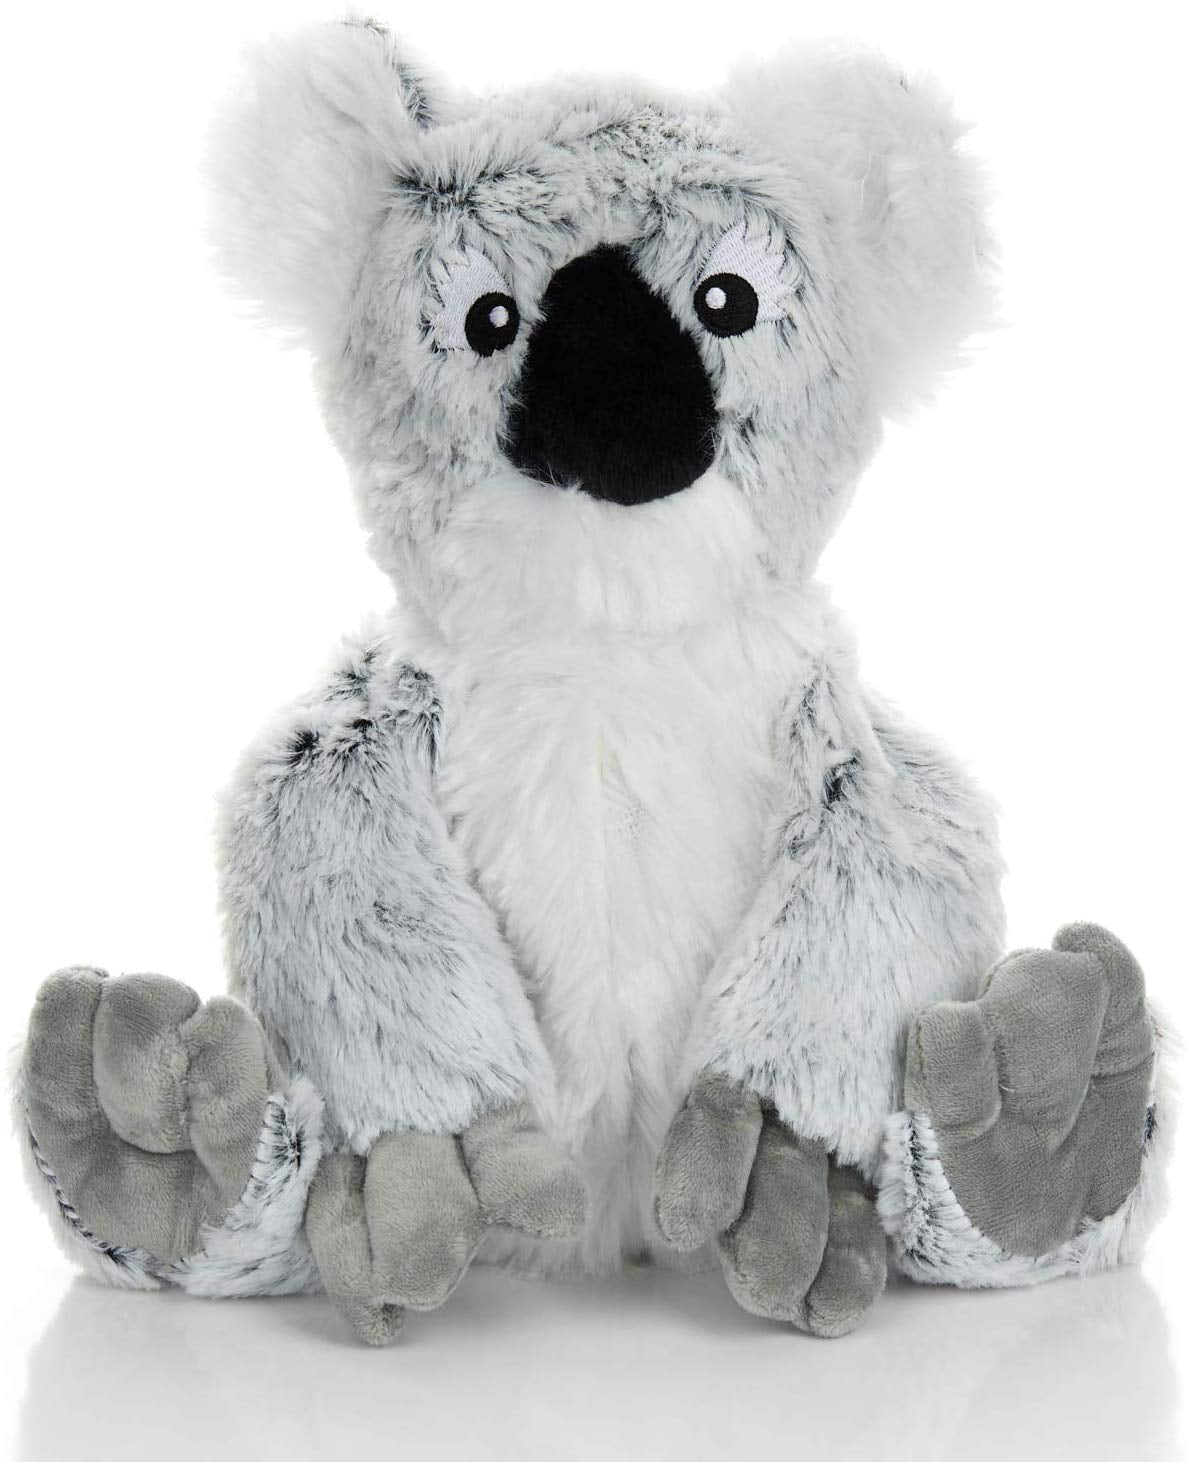 Microwavable Stuffed Animals Walmart Online Discount Shop For Electronics Apparel Toys Books Games Computers Shoes Jewelry Watches Baby Products Sports Outdoors Office Products Bed Bath Furniture Tools Hardware Automotive